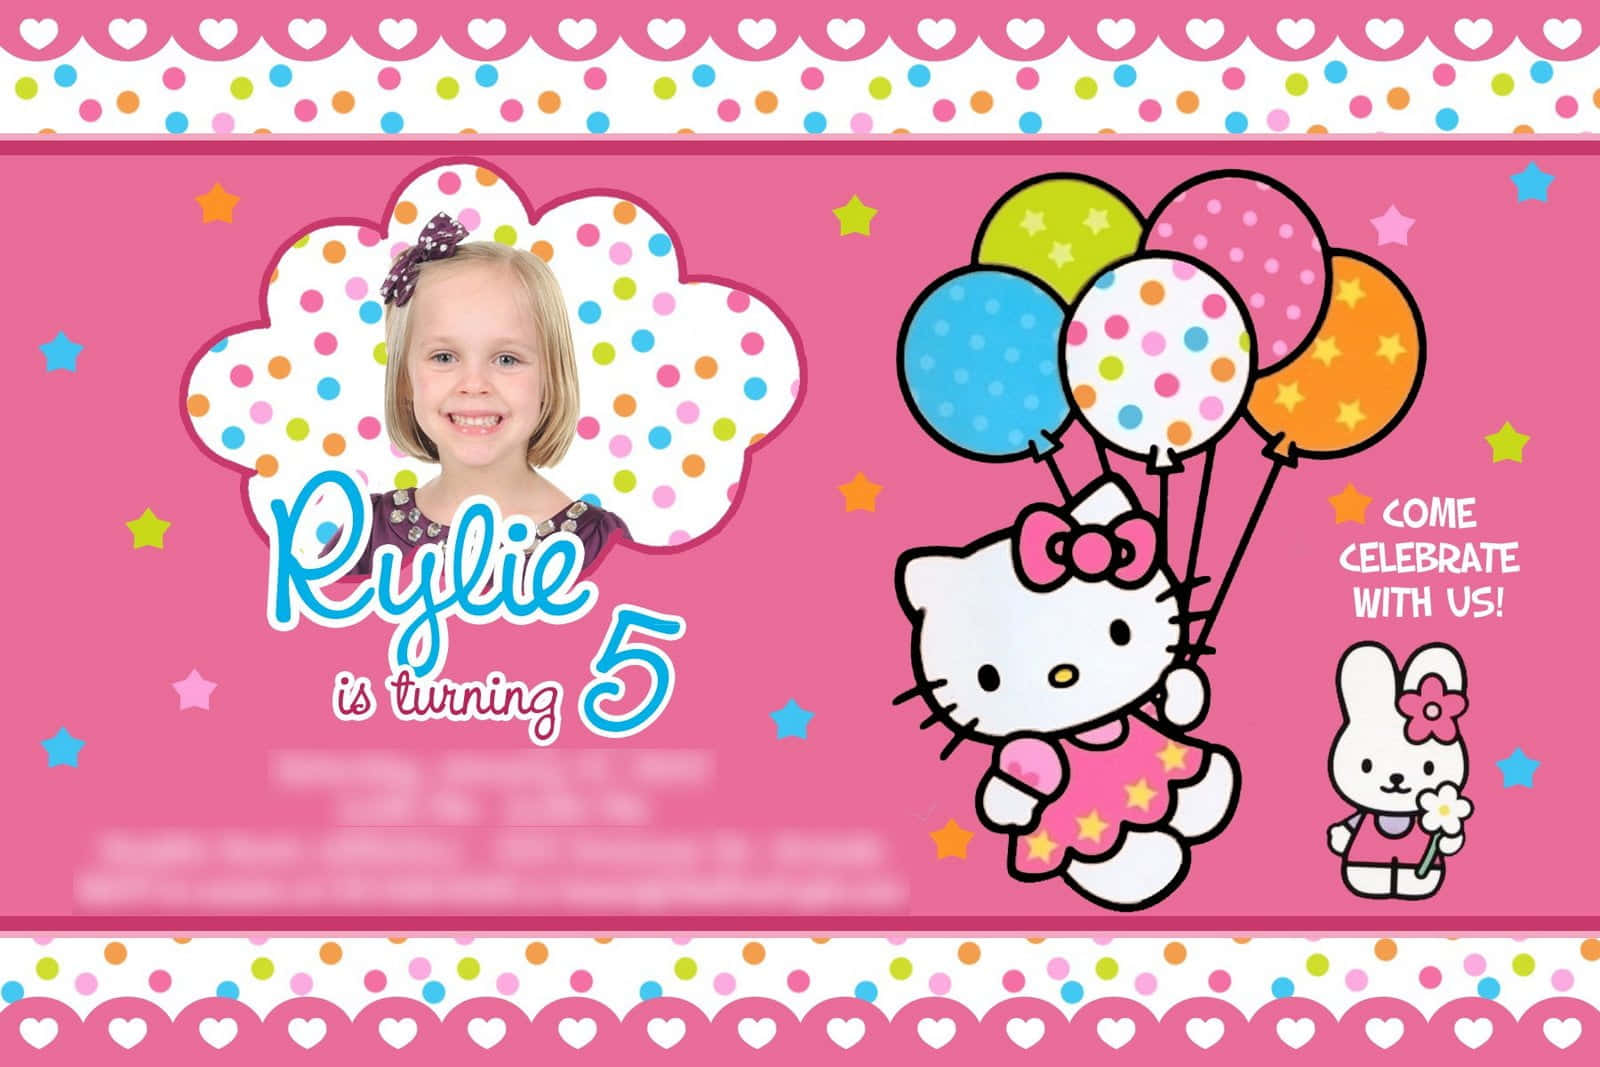 Adorable Hello Kitty Birthday Celebration with Pink Balloons and Tasty Cupcakes Wallpaper